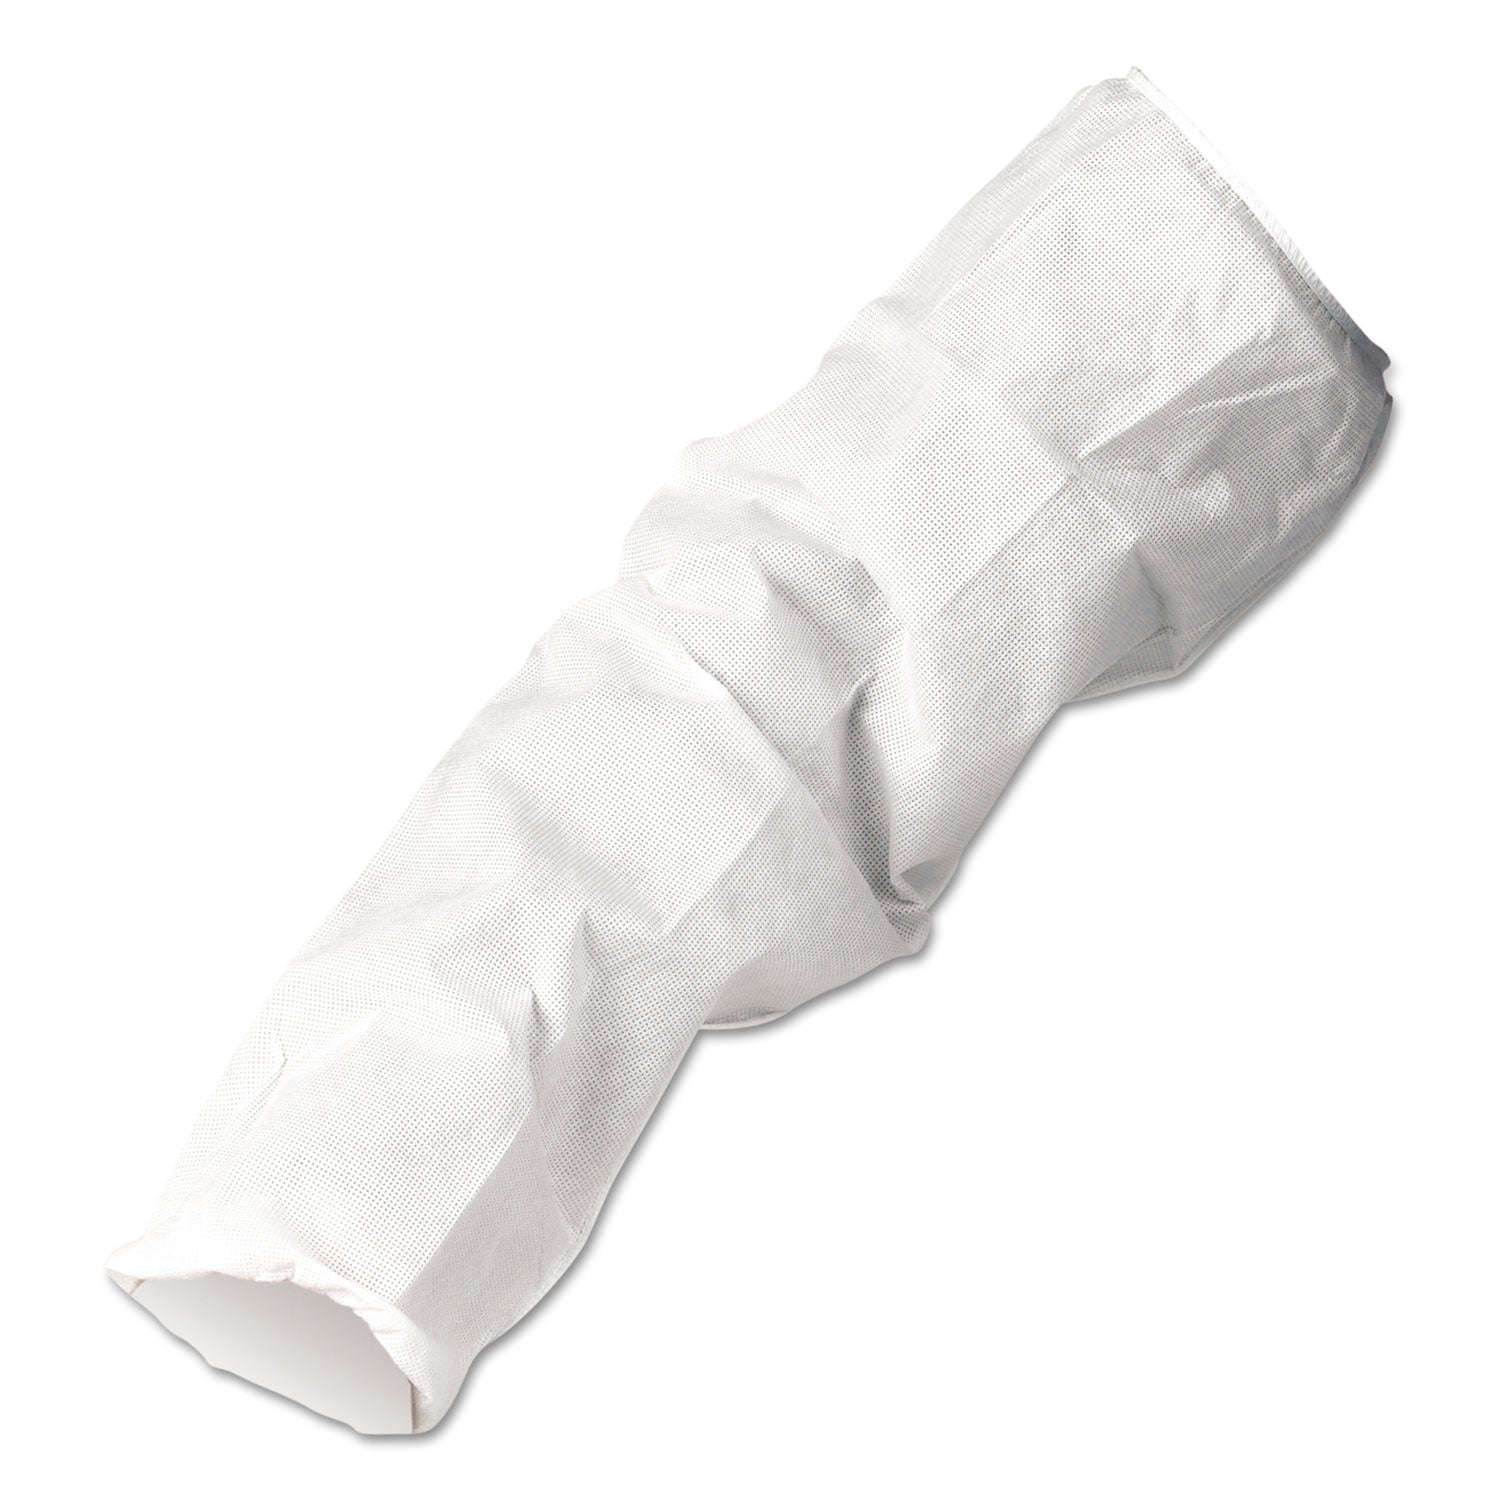 a20-sleeve-protectors-microforce-barrier-sms-fabric-one-size-fits-all-white-200-carton_kcc36870 - 1